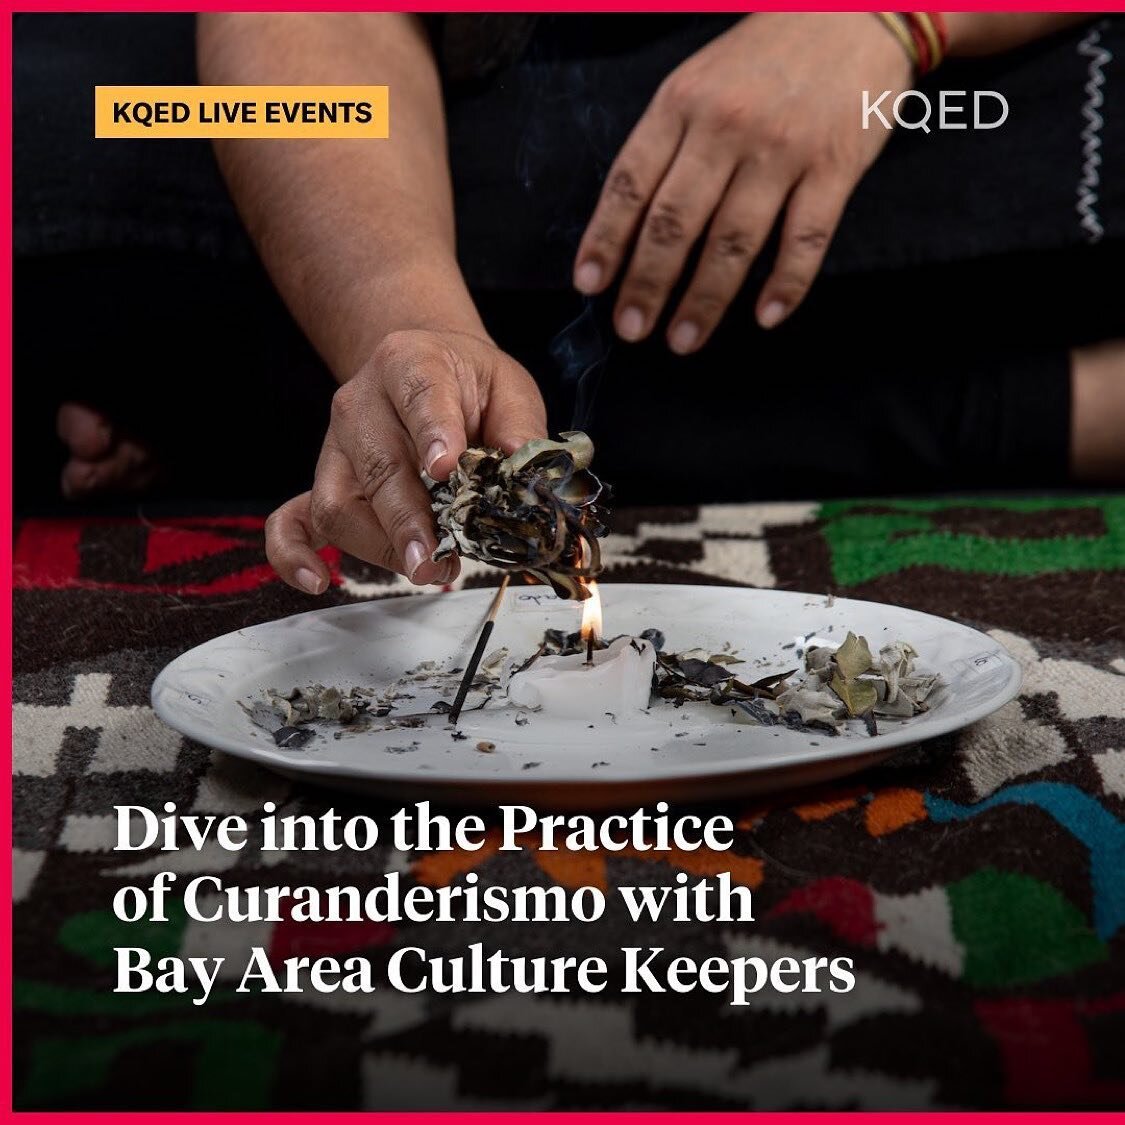 Curious to understand the roots and practices of curanderismo? 

Join Ancestral Arts as we offer the final season of The Curanderx Toolkit class beginning September 28th! 

Tune in next week with @kqed as they dive in this sacred world with graciousn